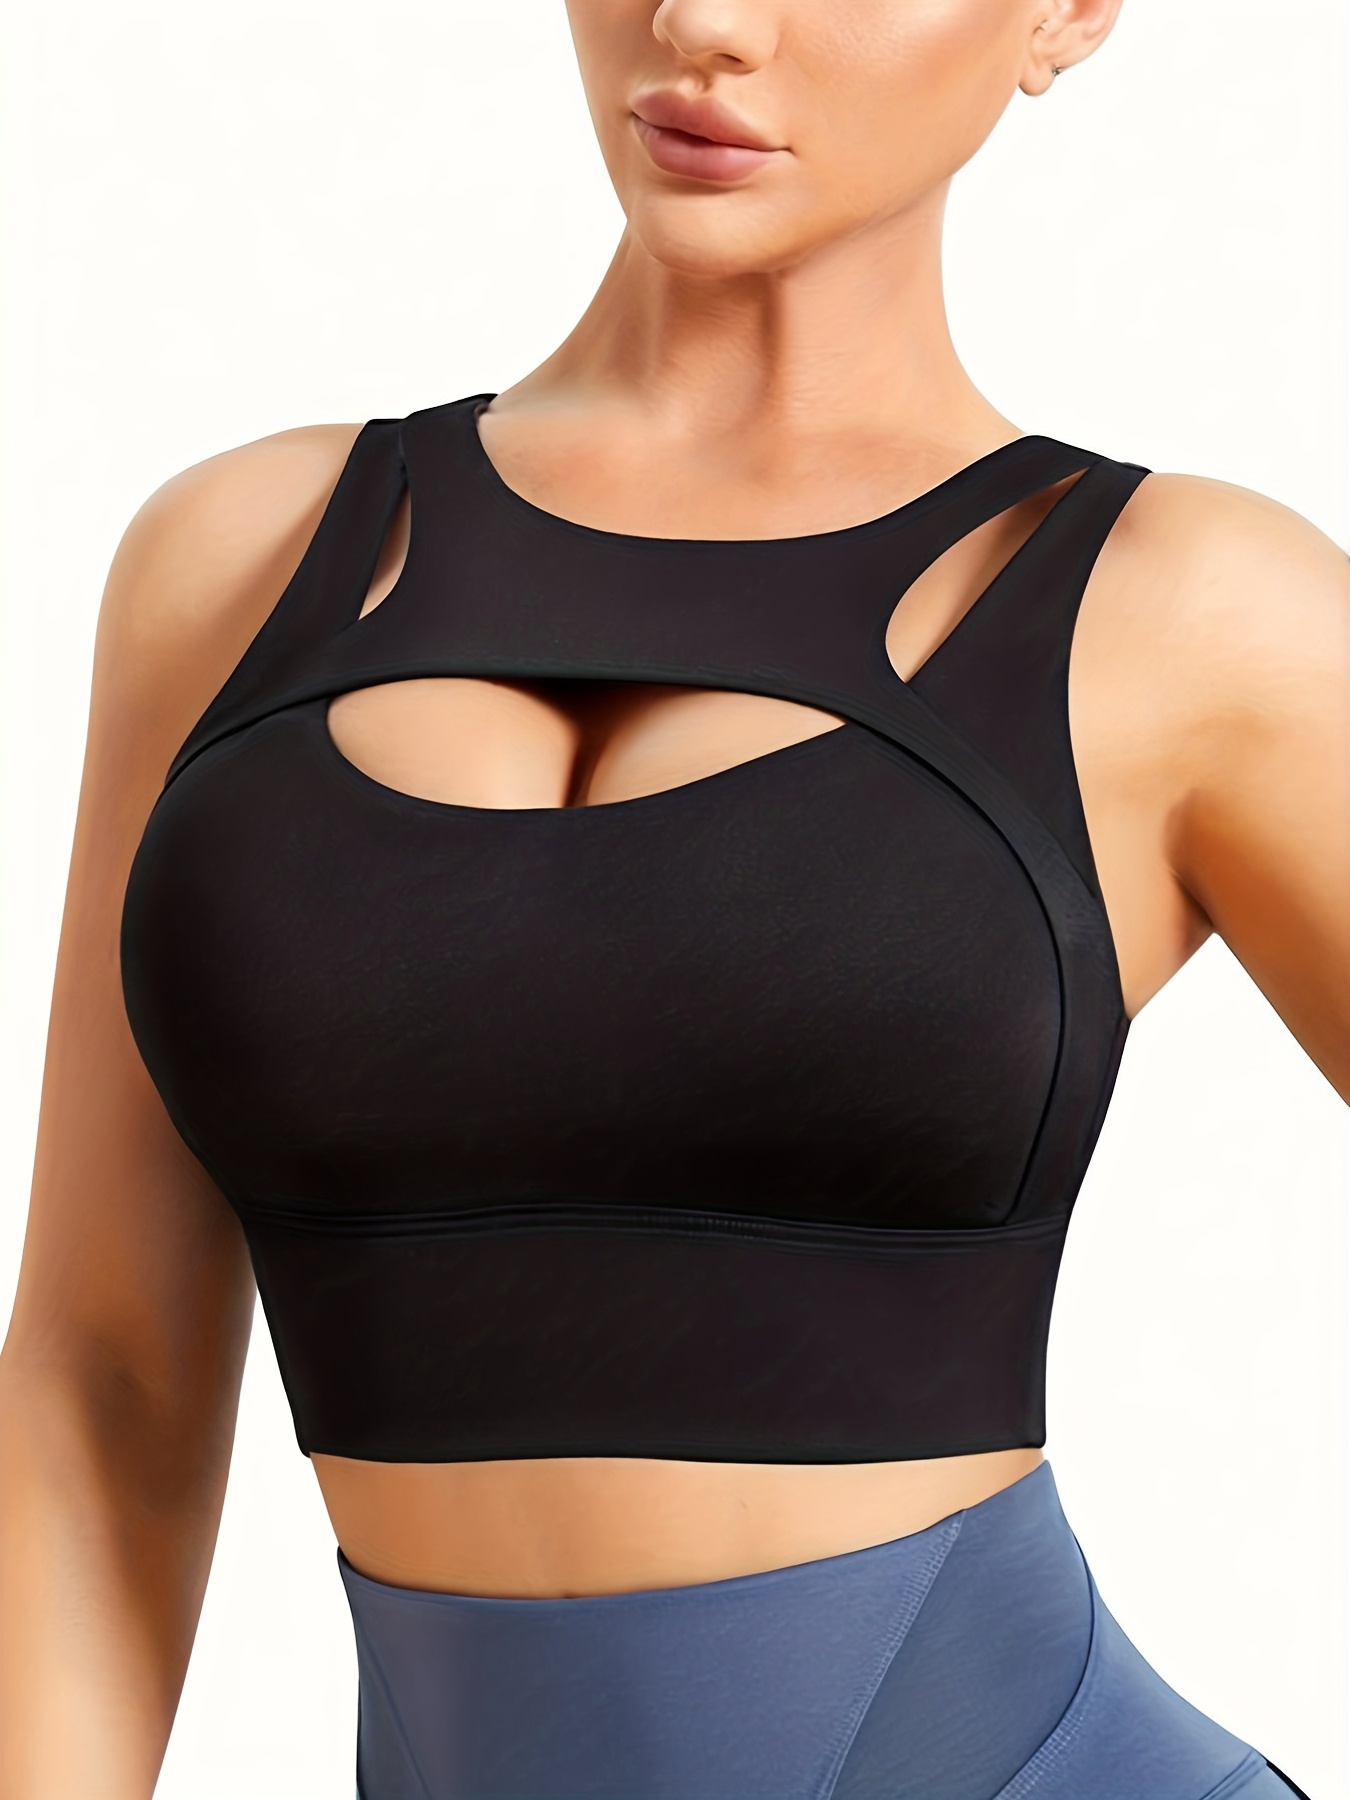 Smoothing Women's Sports Bras for Large Bust Push Up Athletic Gym for Women  Seamless Cute High Support Workout Yoga